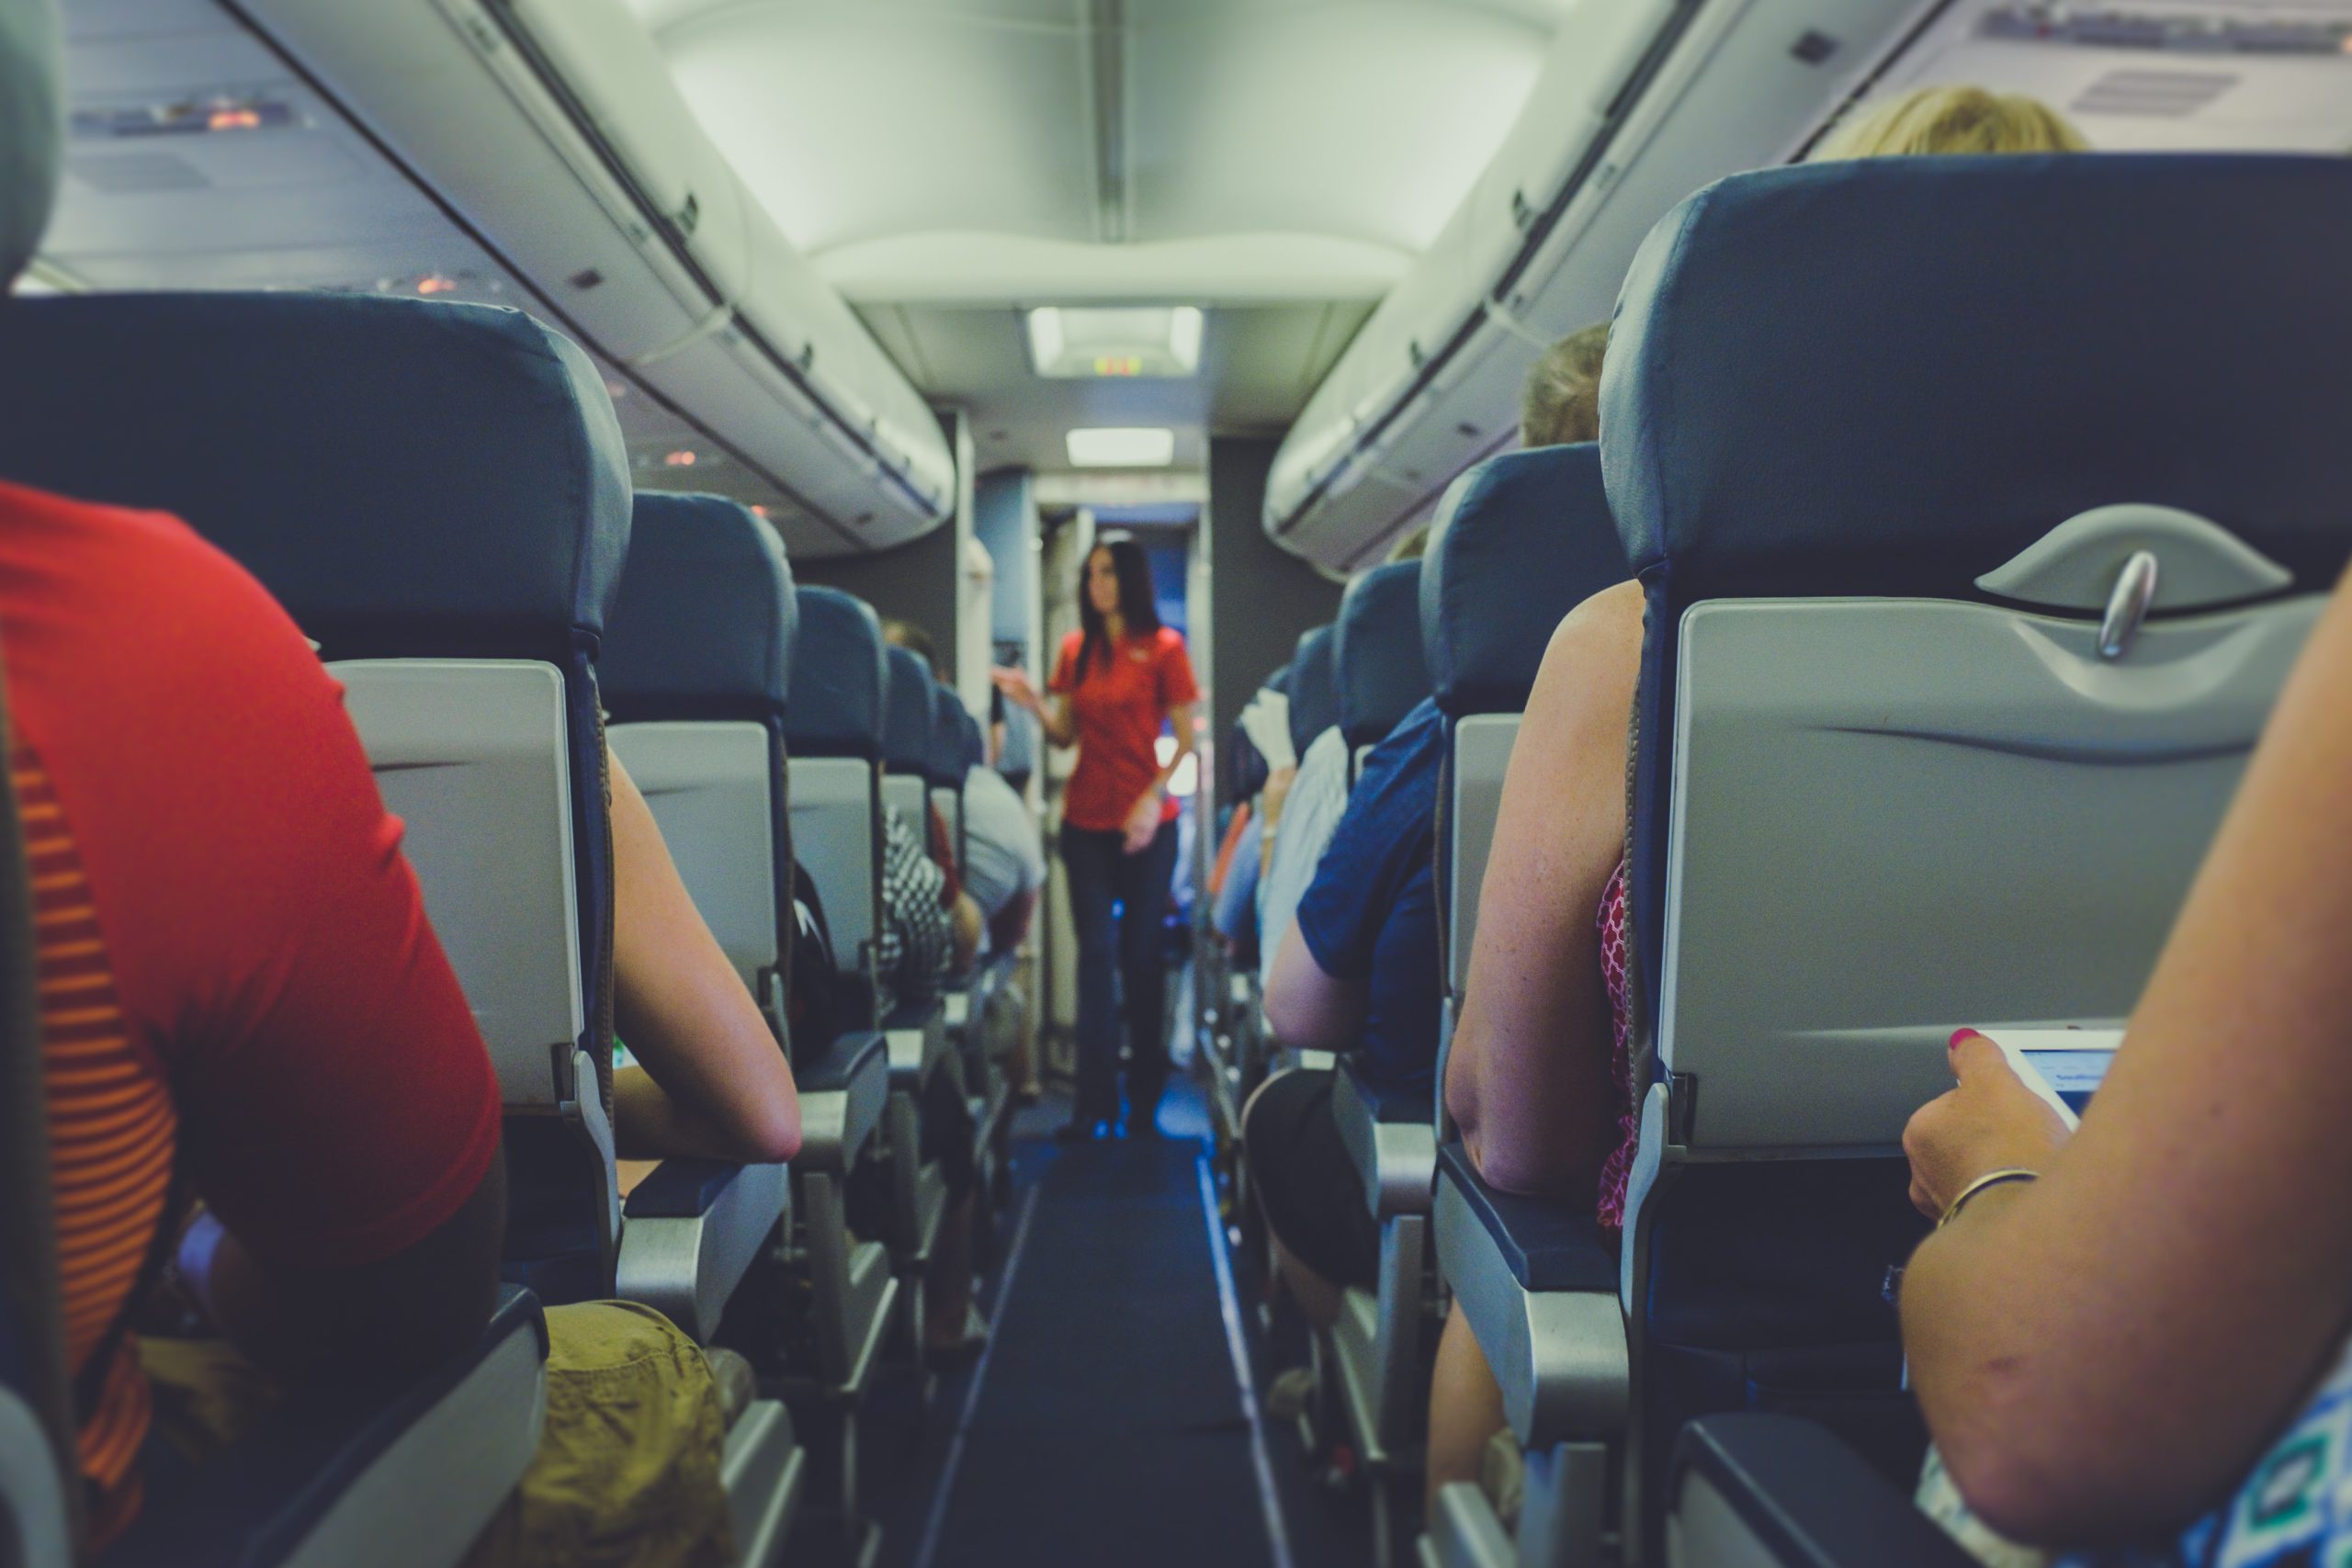 Can a felon choose opportunity to become a flight attendant?